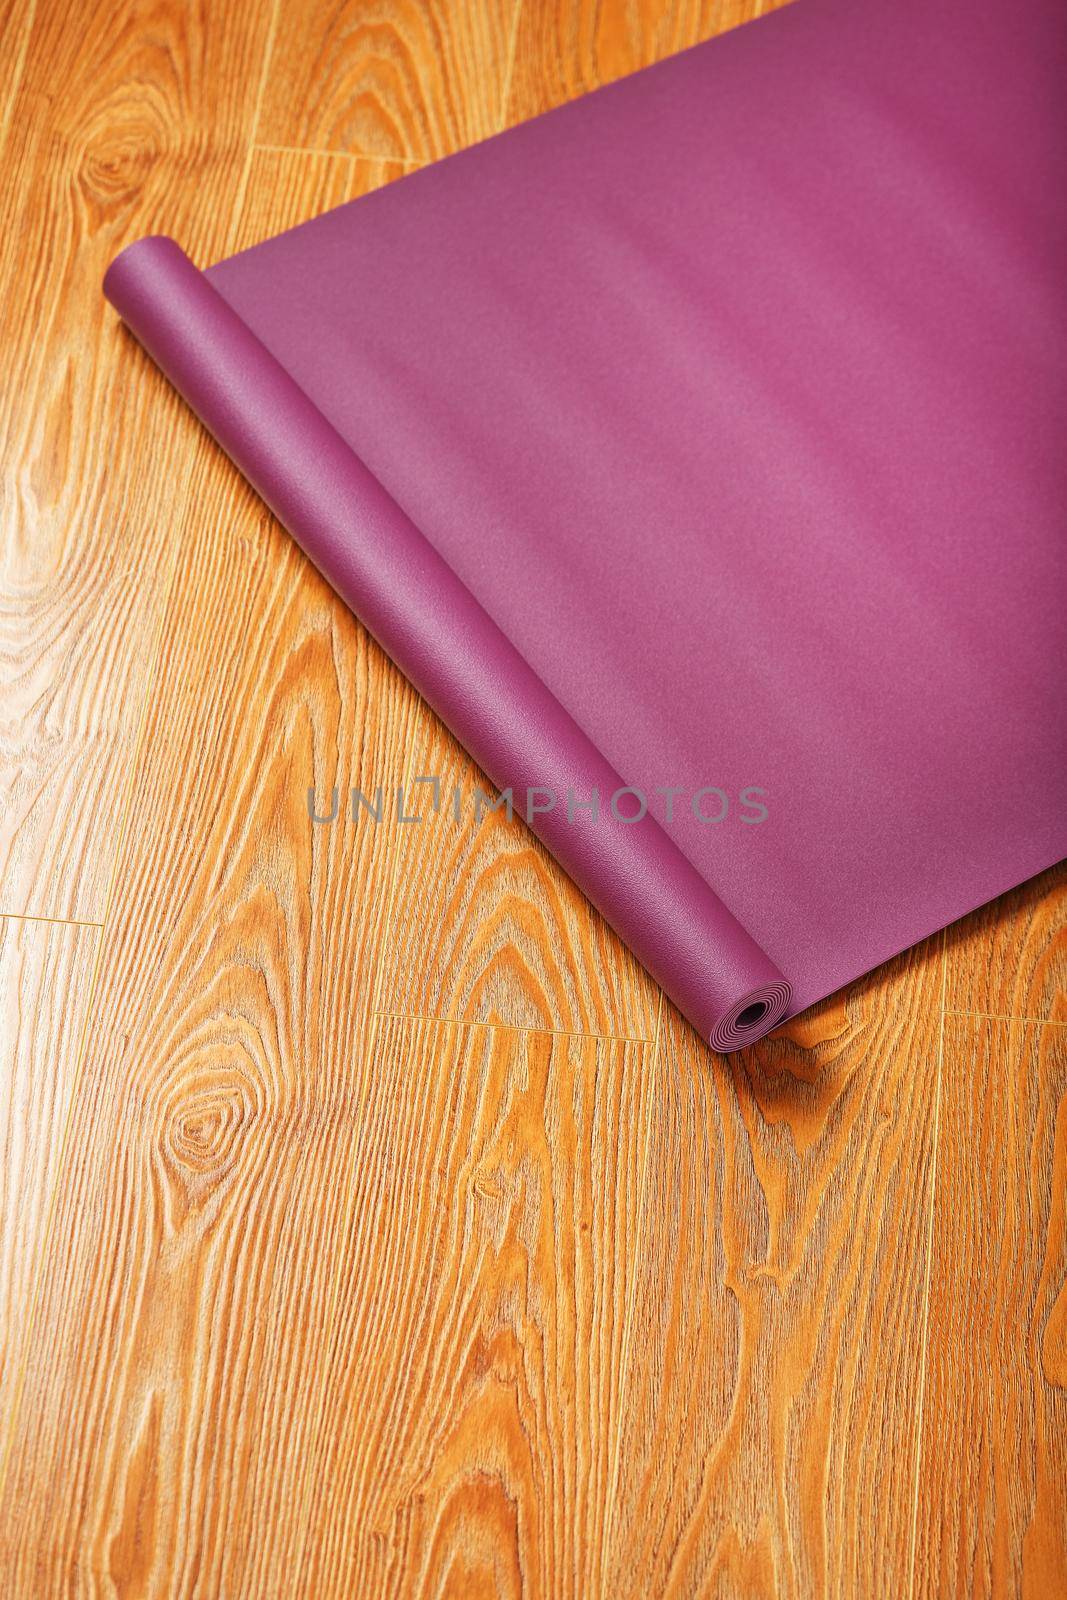 A lilac yoga mat is twisted on the wooden floor. by AlexGrec